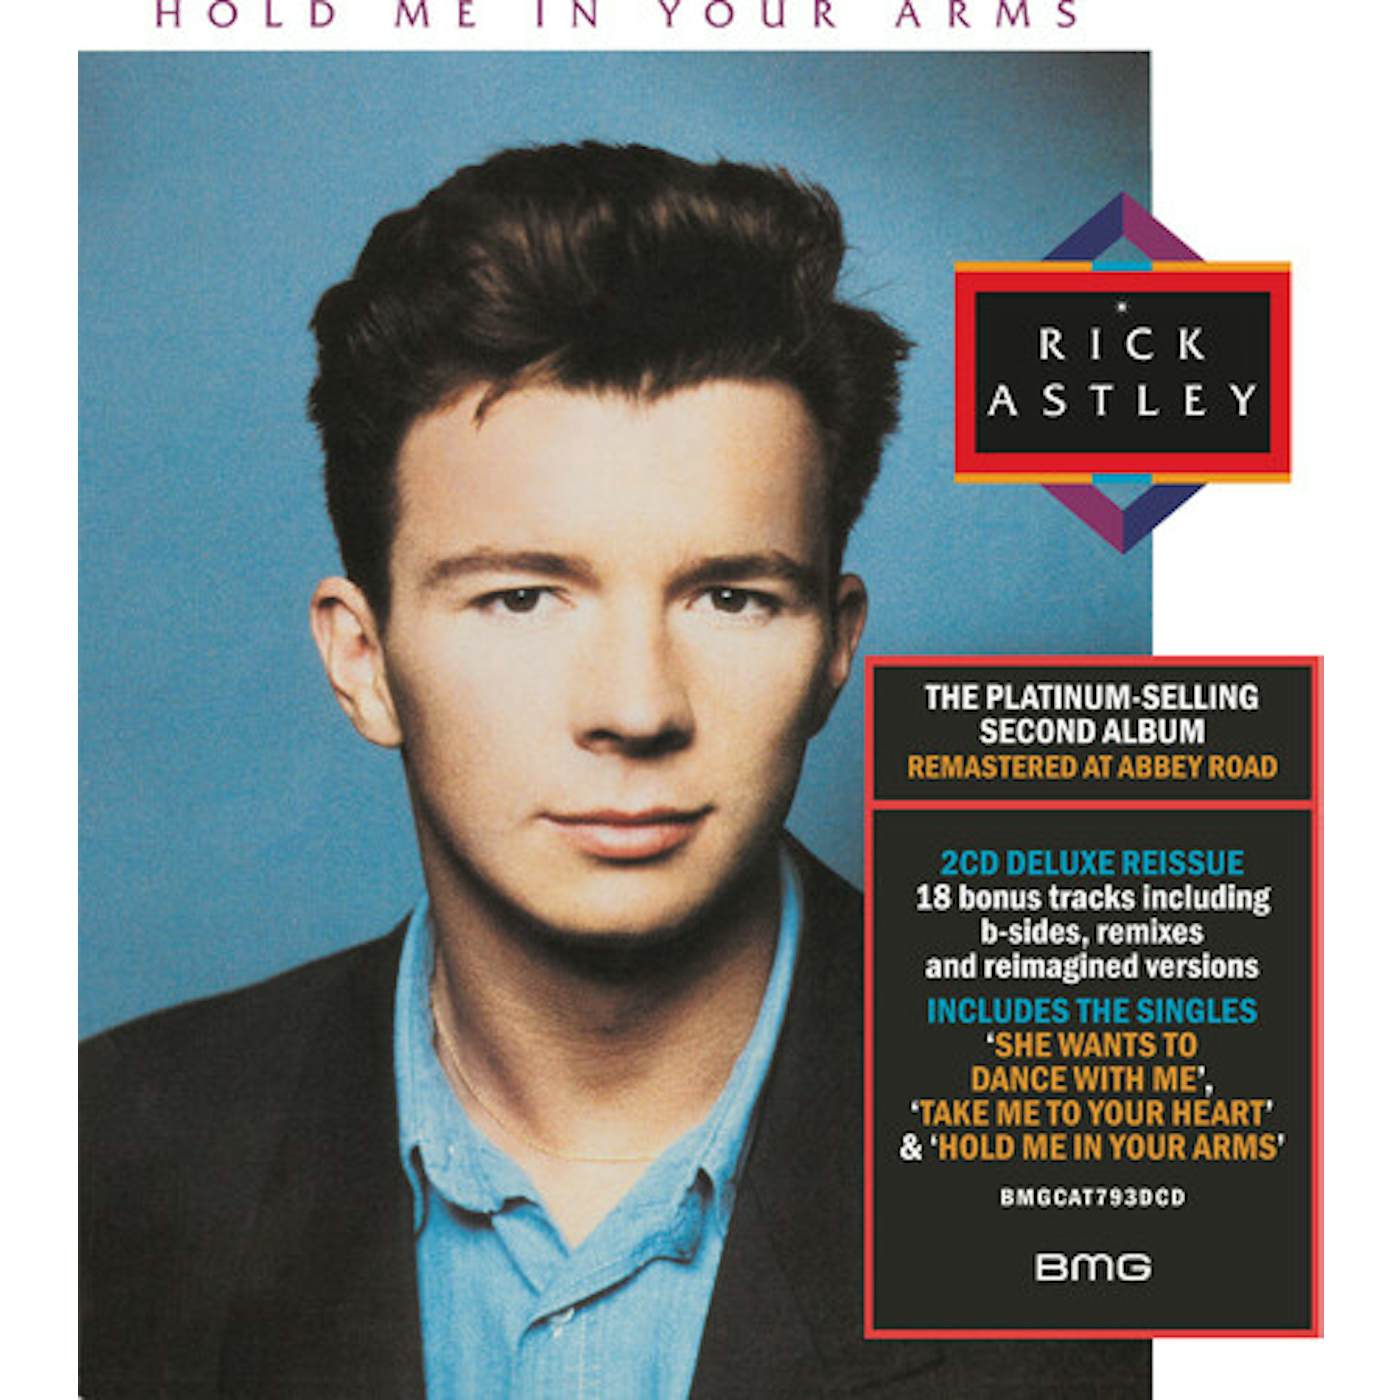 Rick Astley HOLD ME IN YOUR ARMS CD